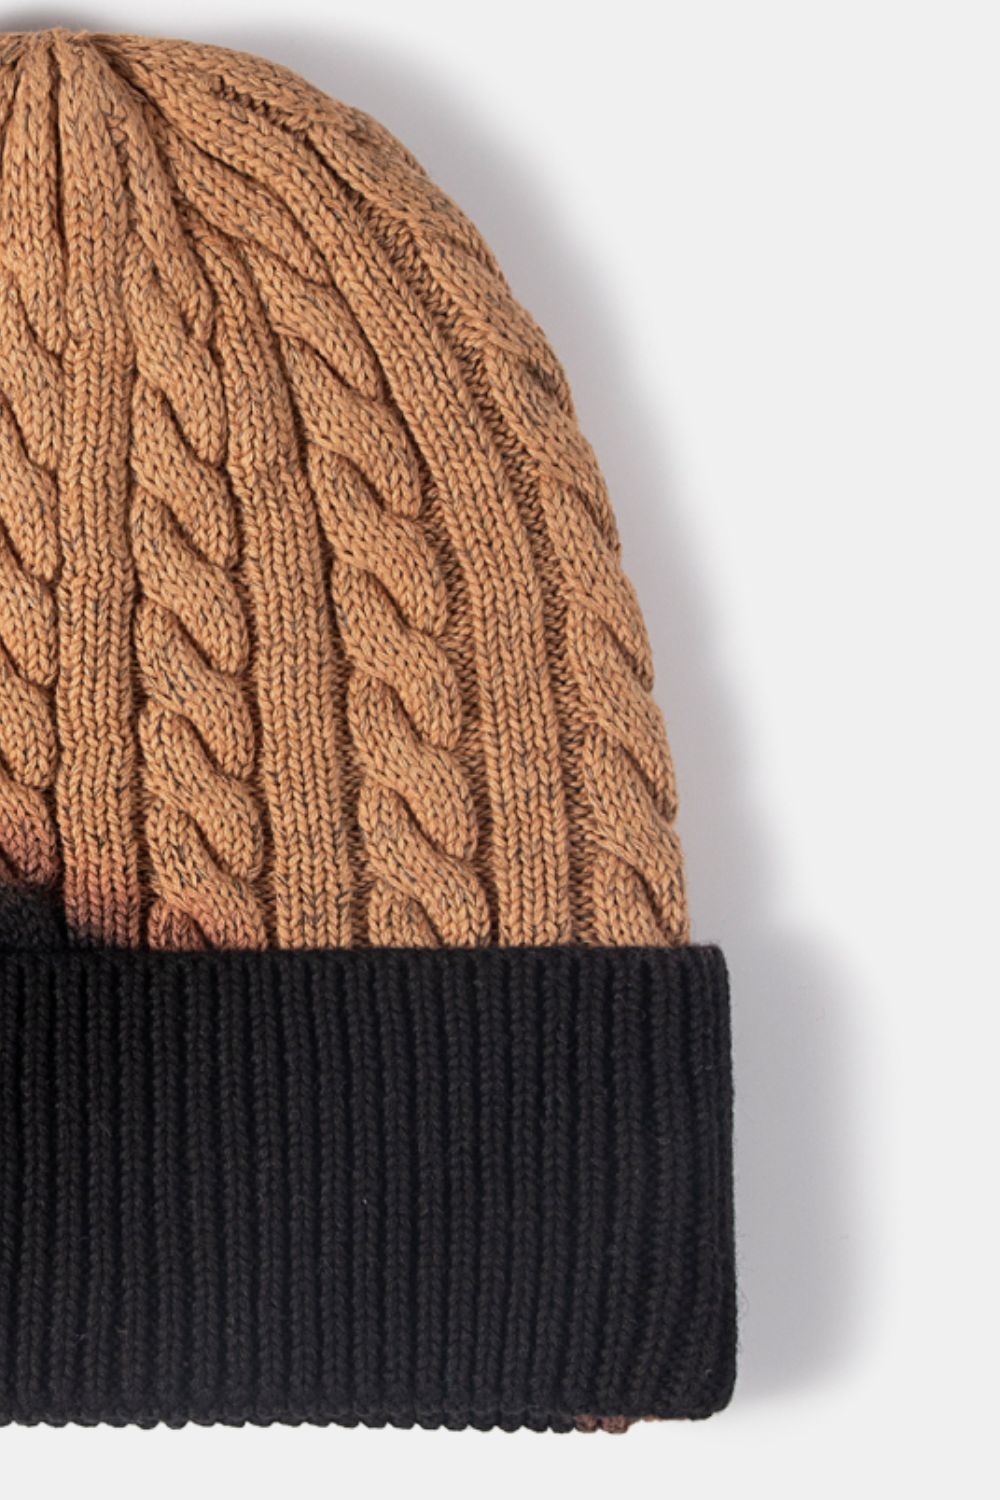 Contrast Tie-Dye Cable-Knit Cuffed Beanie - Cheeky Chic Boutique